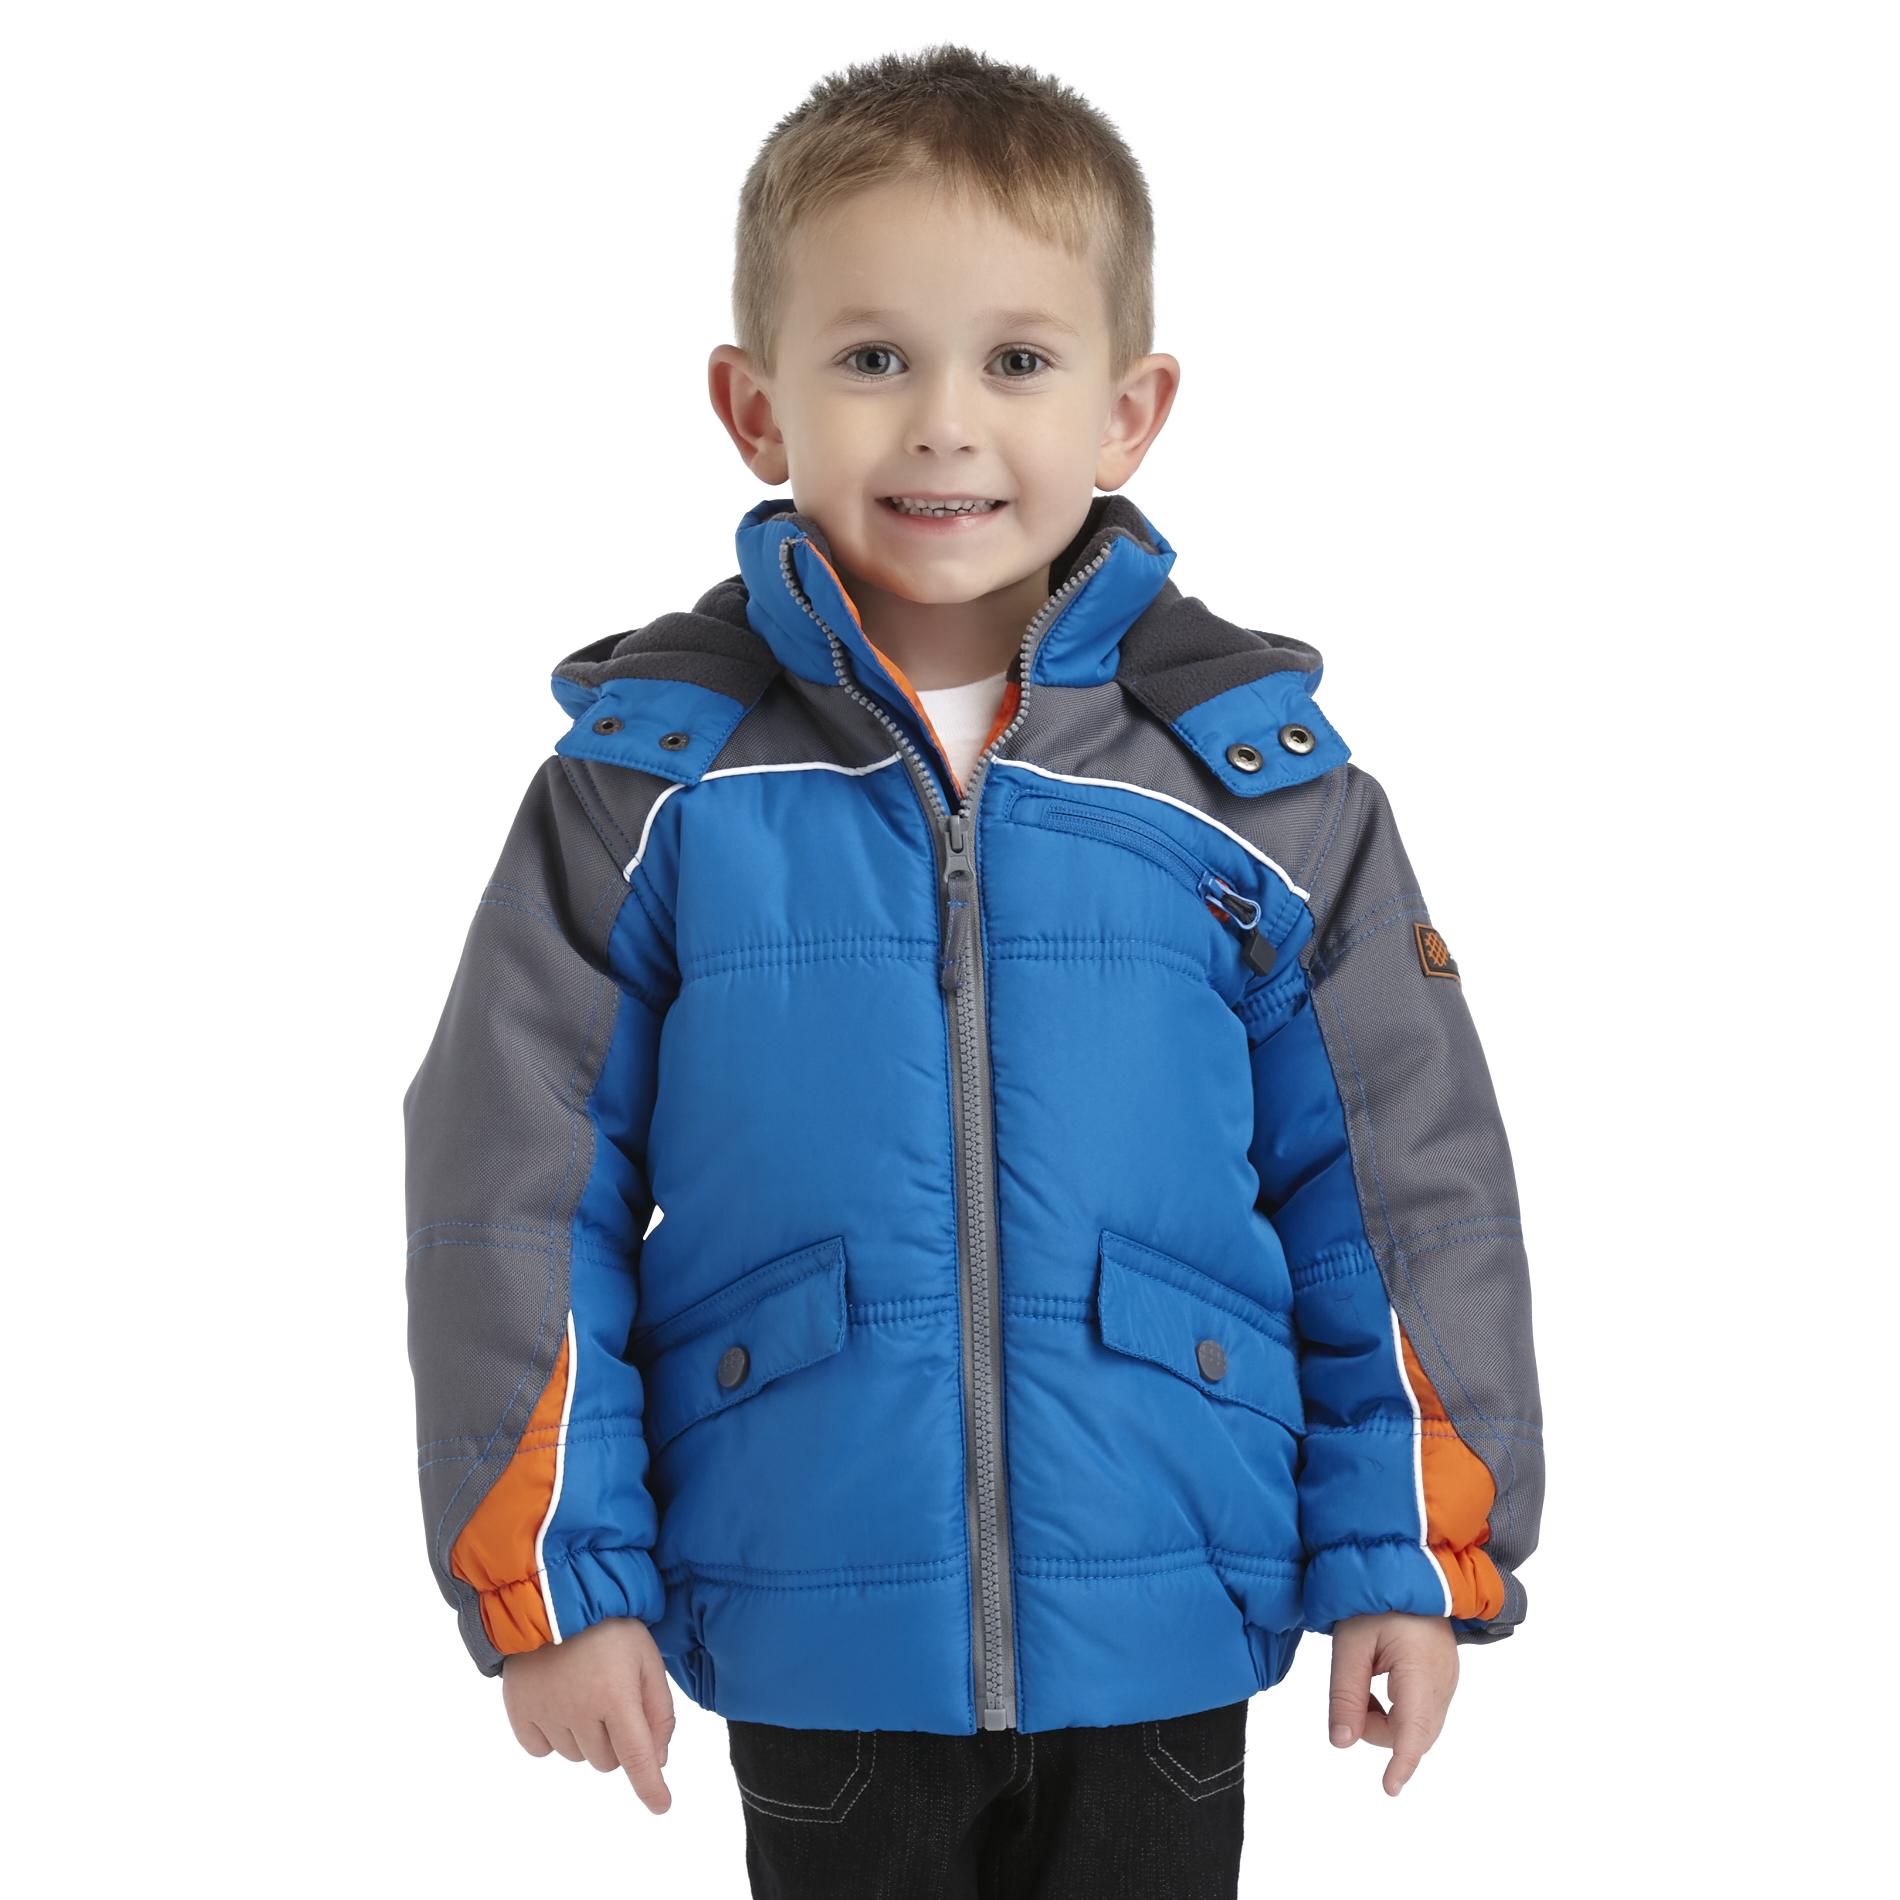 Big Chill Toddler Boy's Hooded Puffer Coat